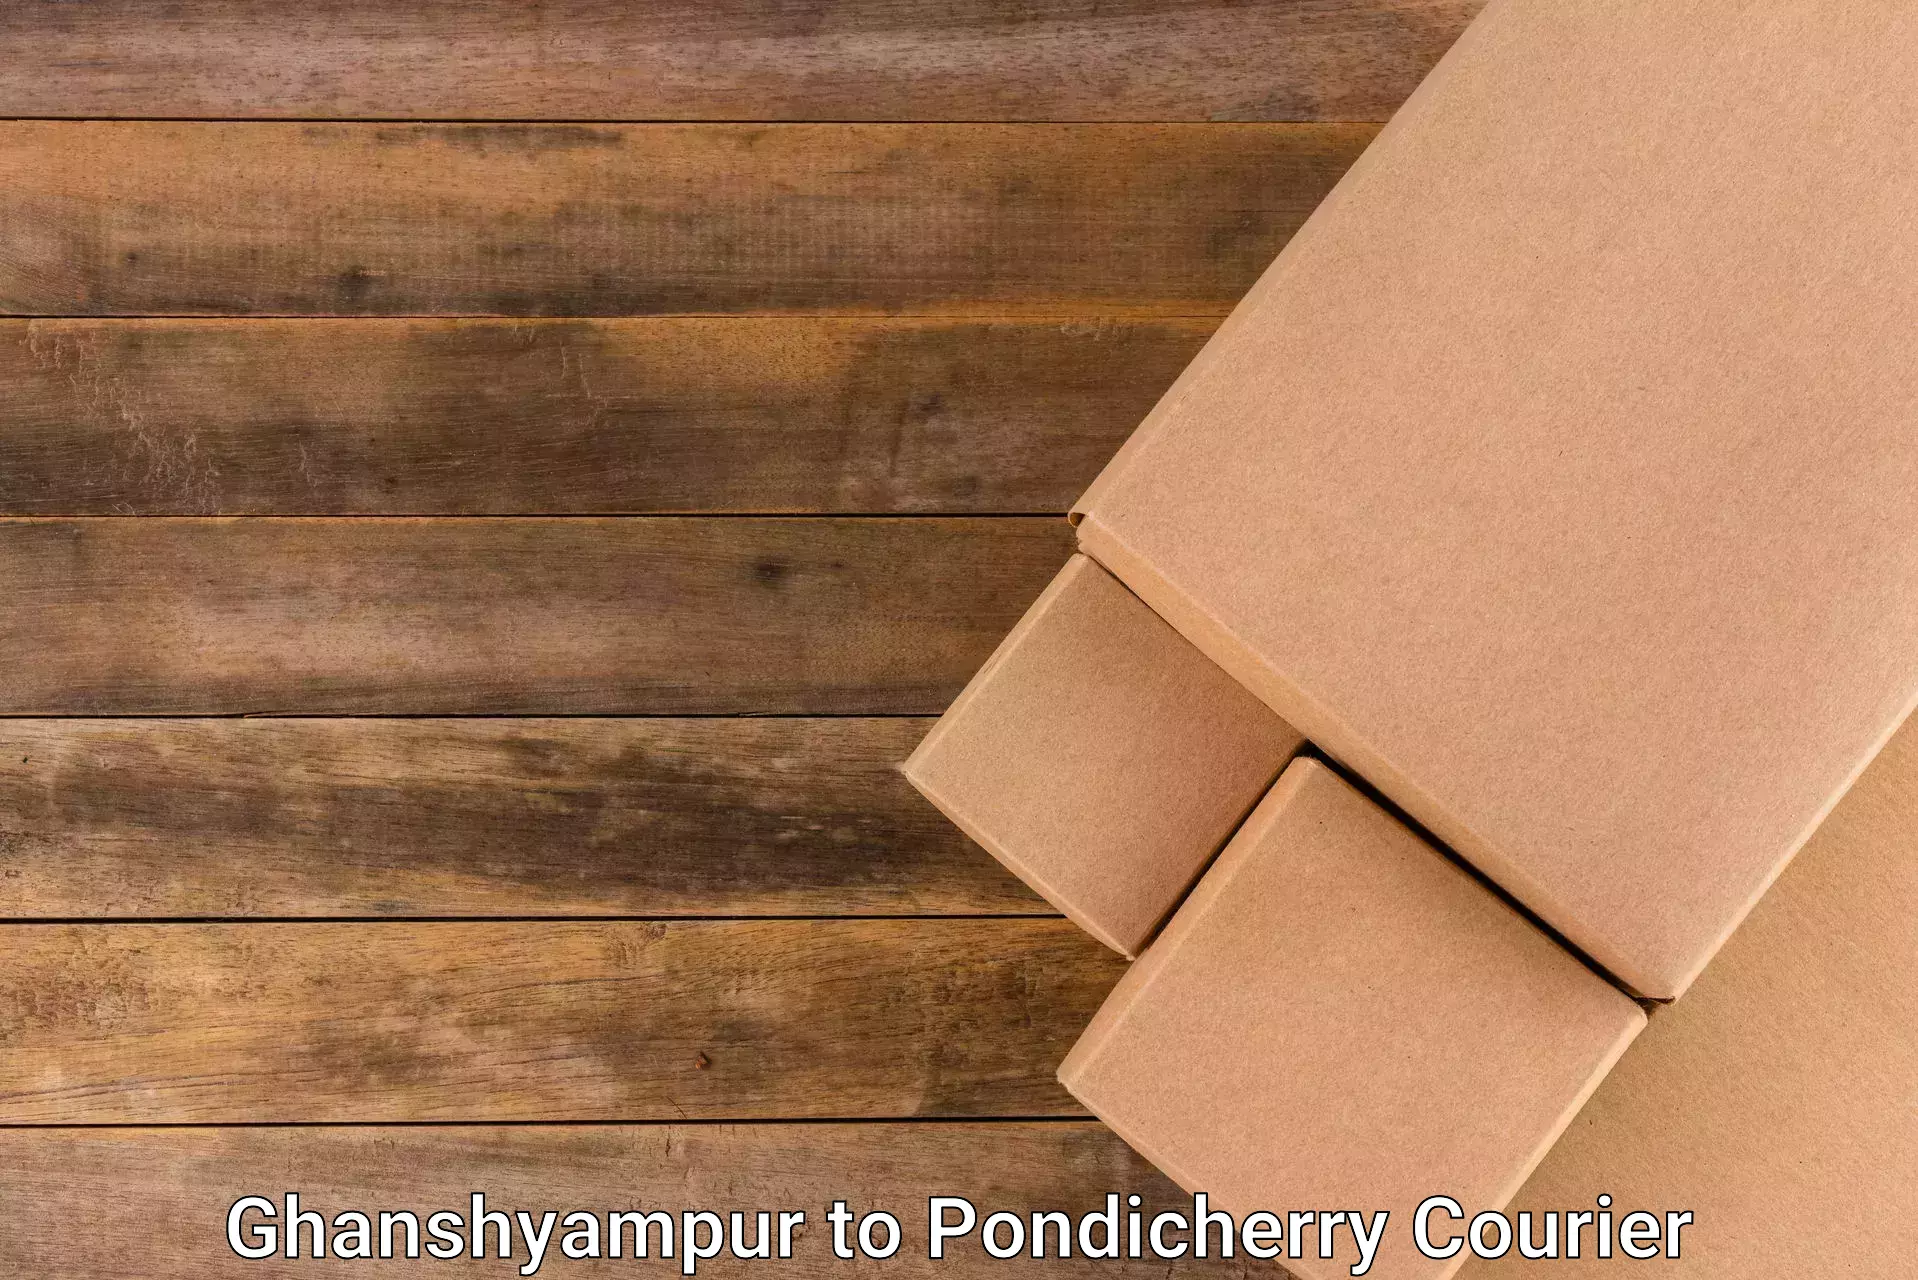 24-hour delivery options Ghanshyampur to Pondicherry